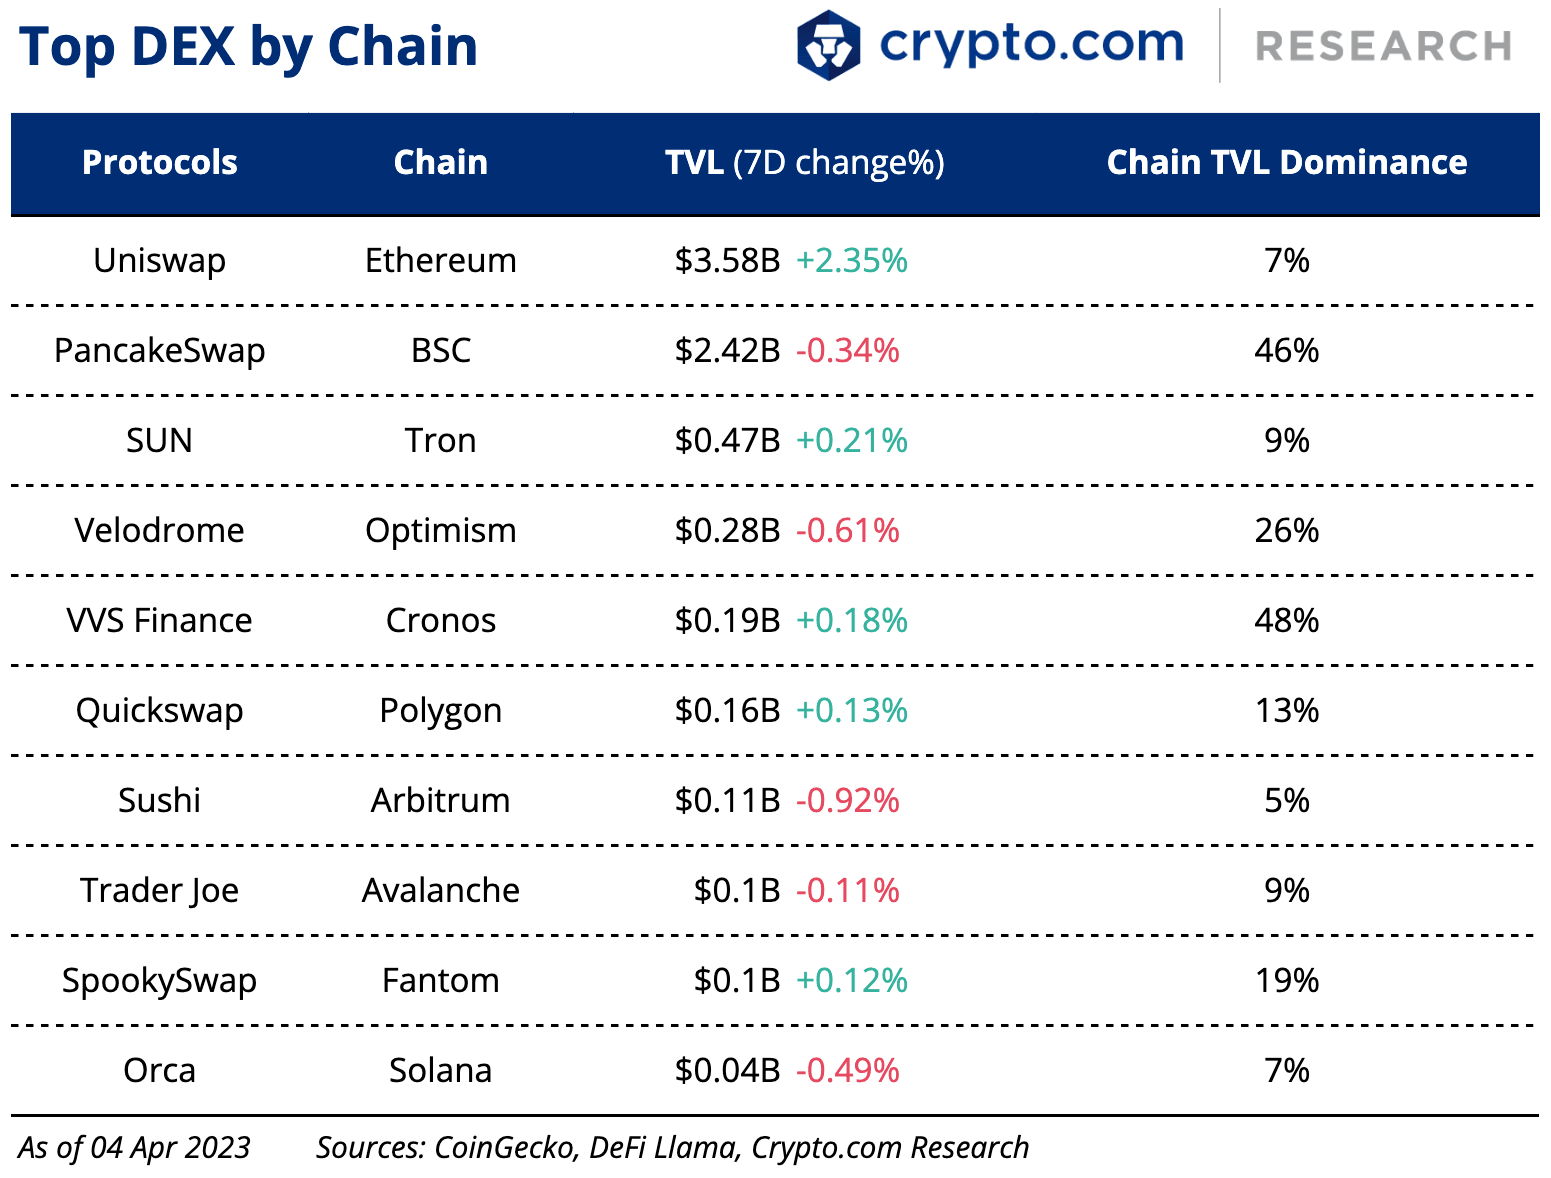 Top Dex By Chain 5 Apr